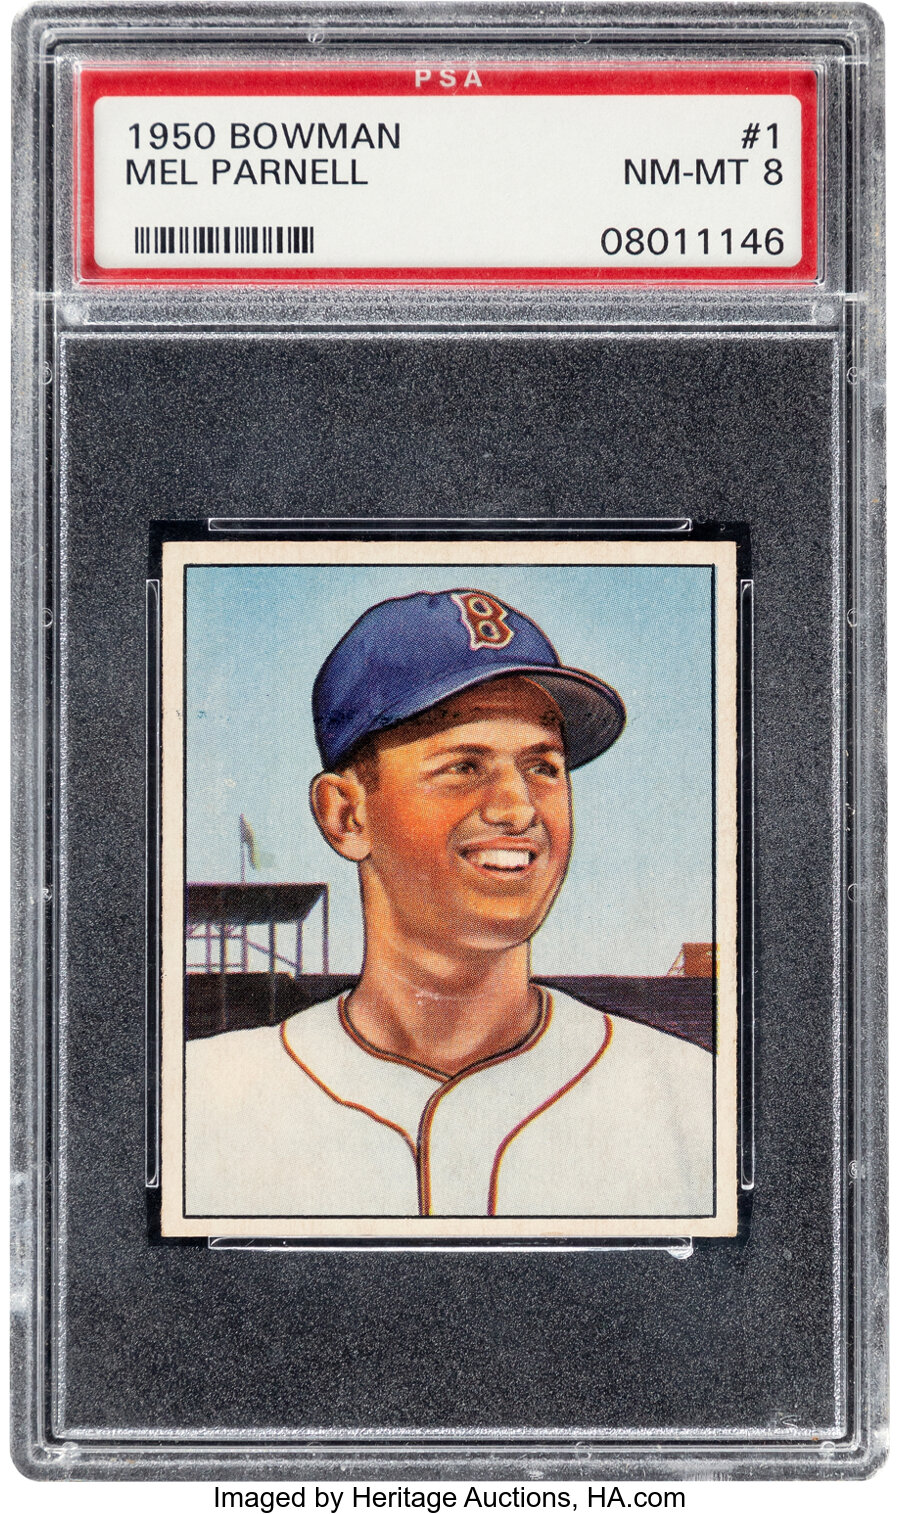 1950 Bowman Mel Parnell #1 PSA NM-MT 8 - Only One Higher